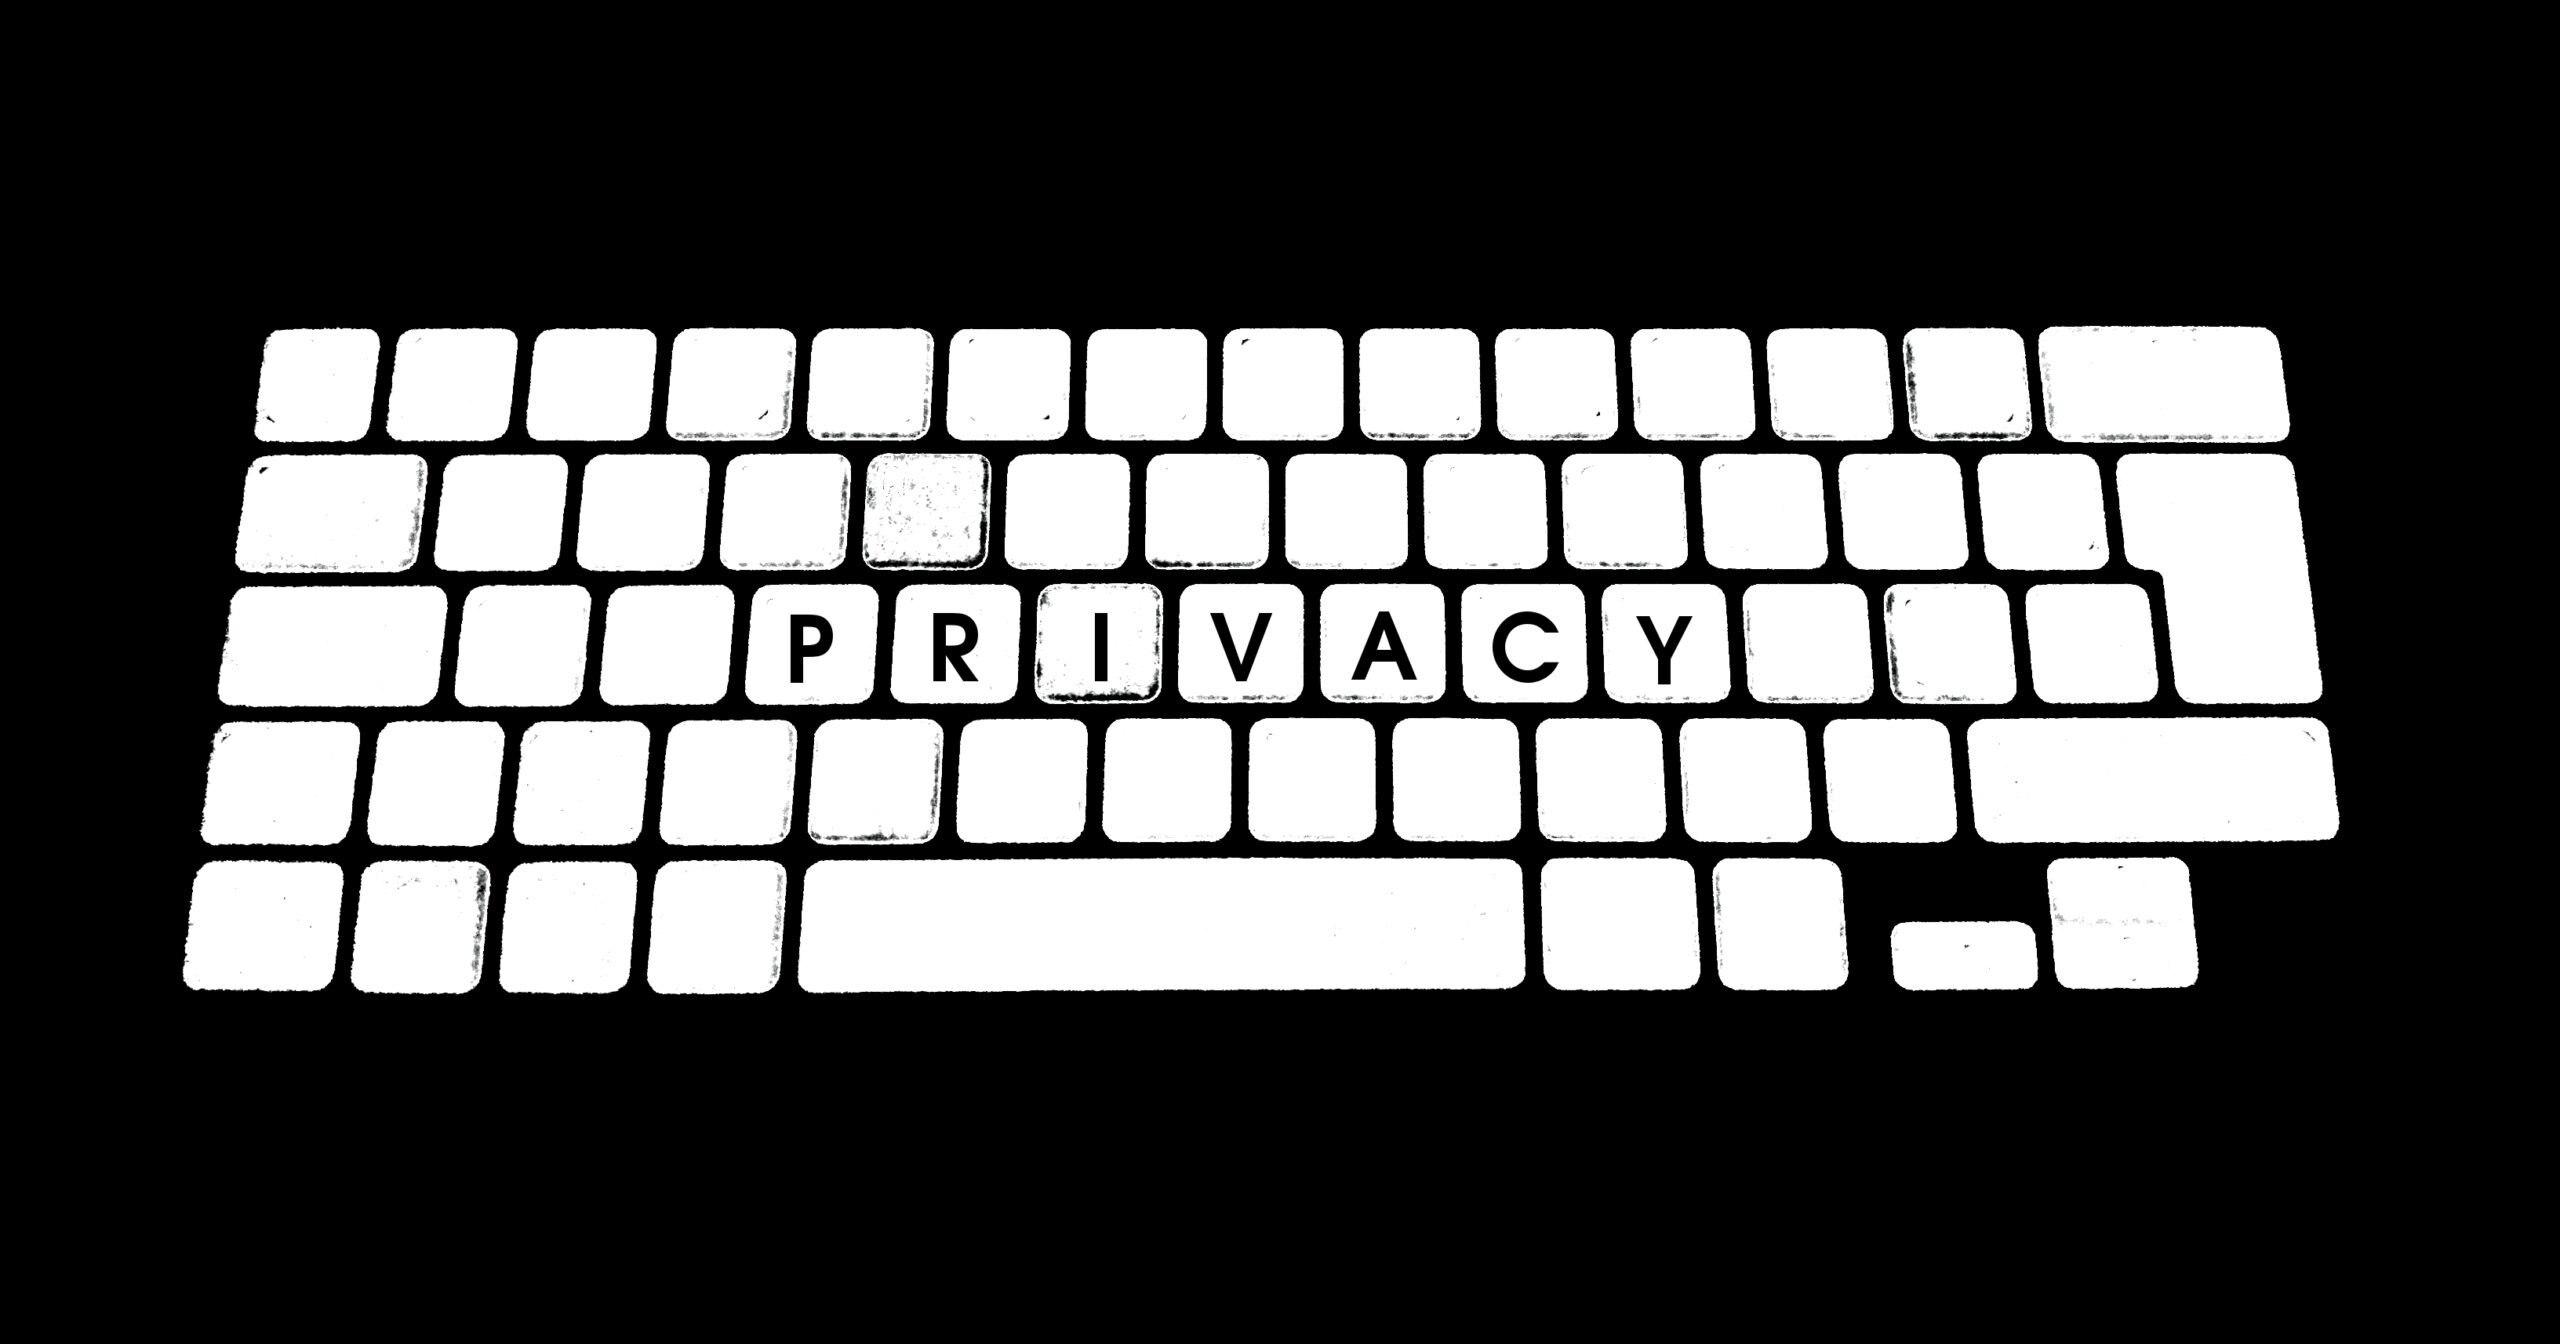 Privacy? More Like Piracy